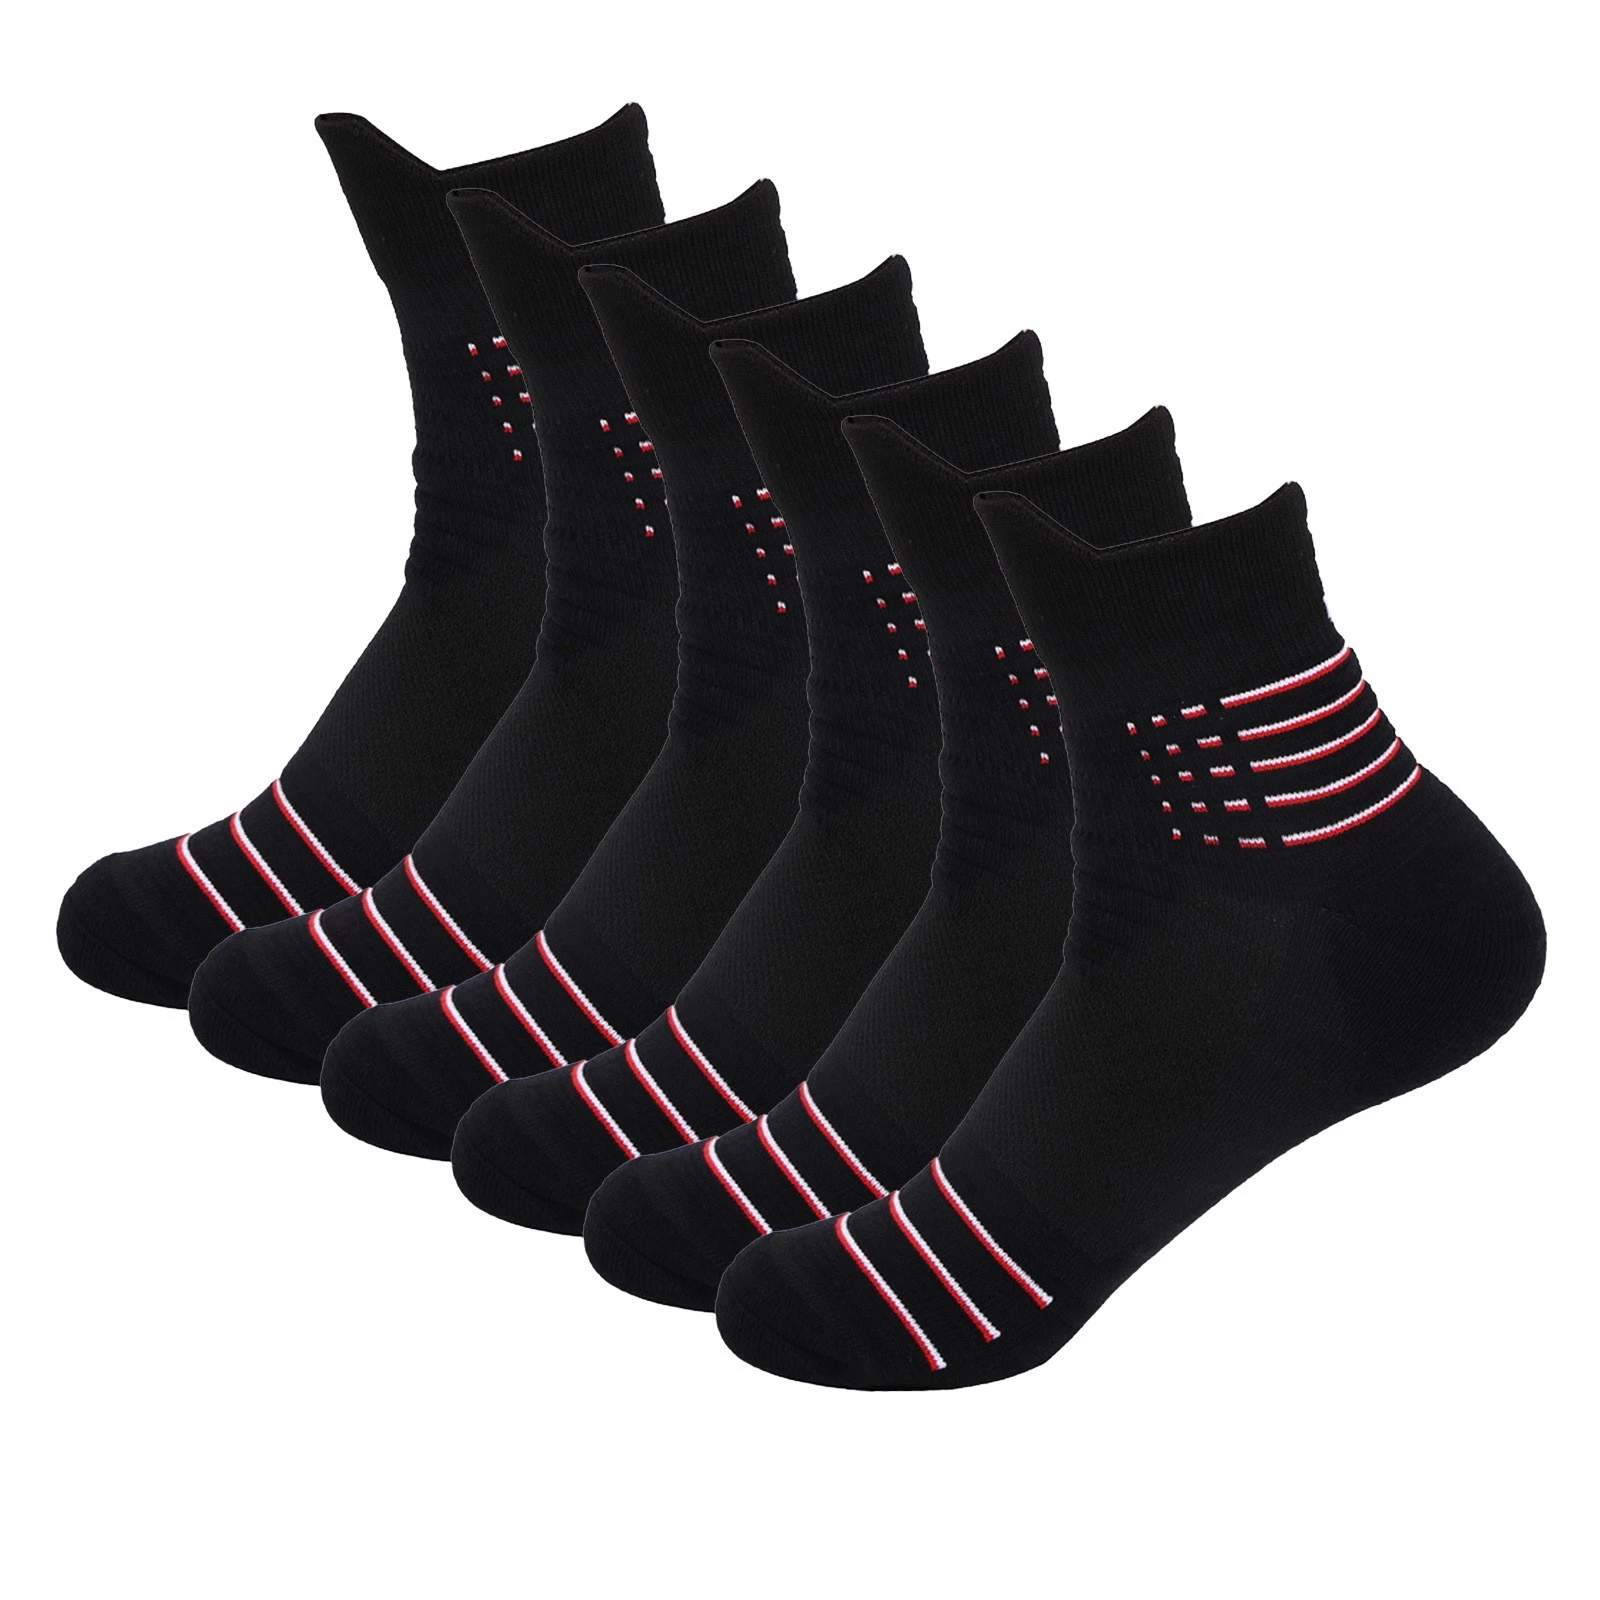 S-SHAPER Ankle Running Athletic Socks Low Cut Sports Tab Socks for Men and Women Manufacturer